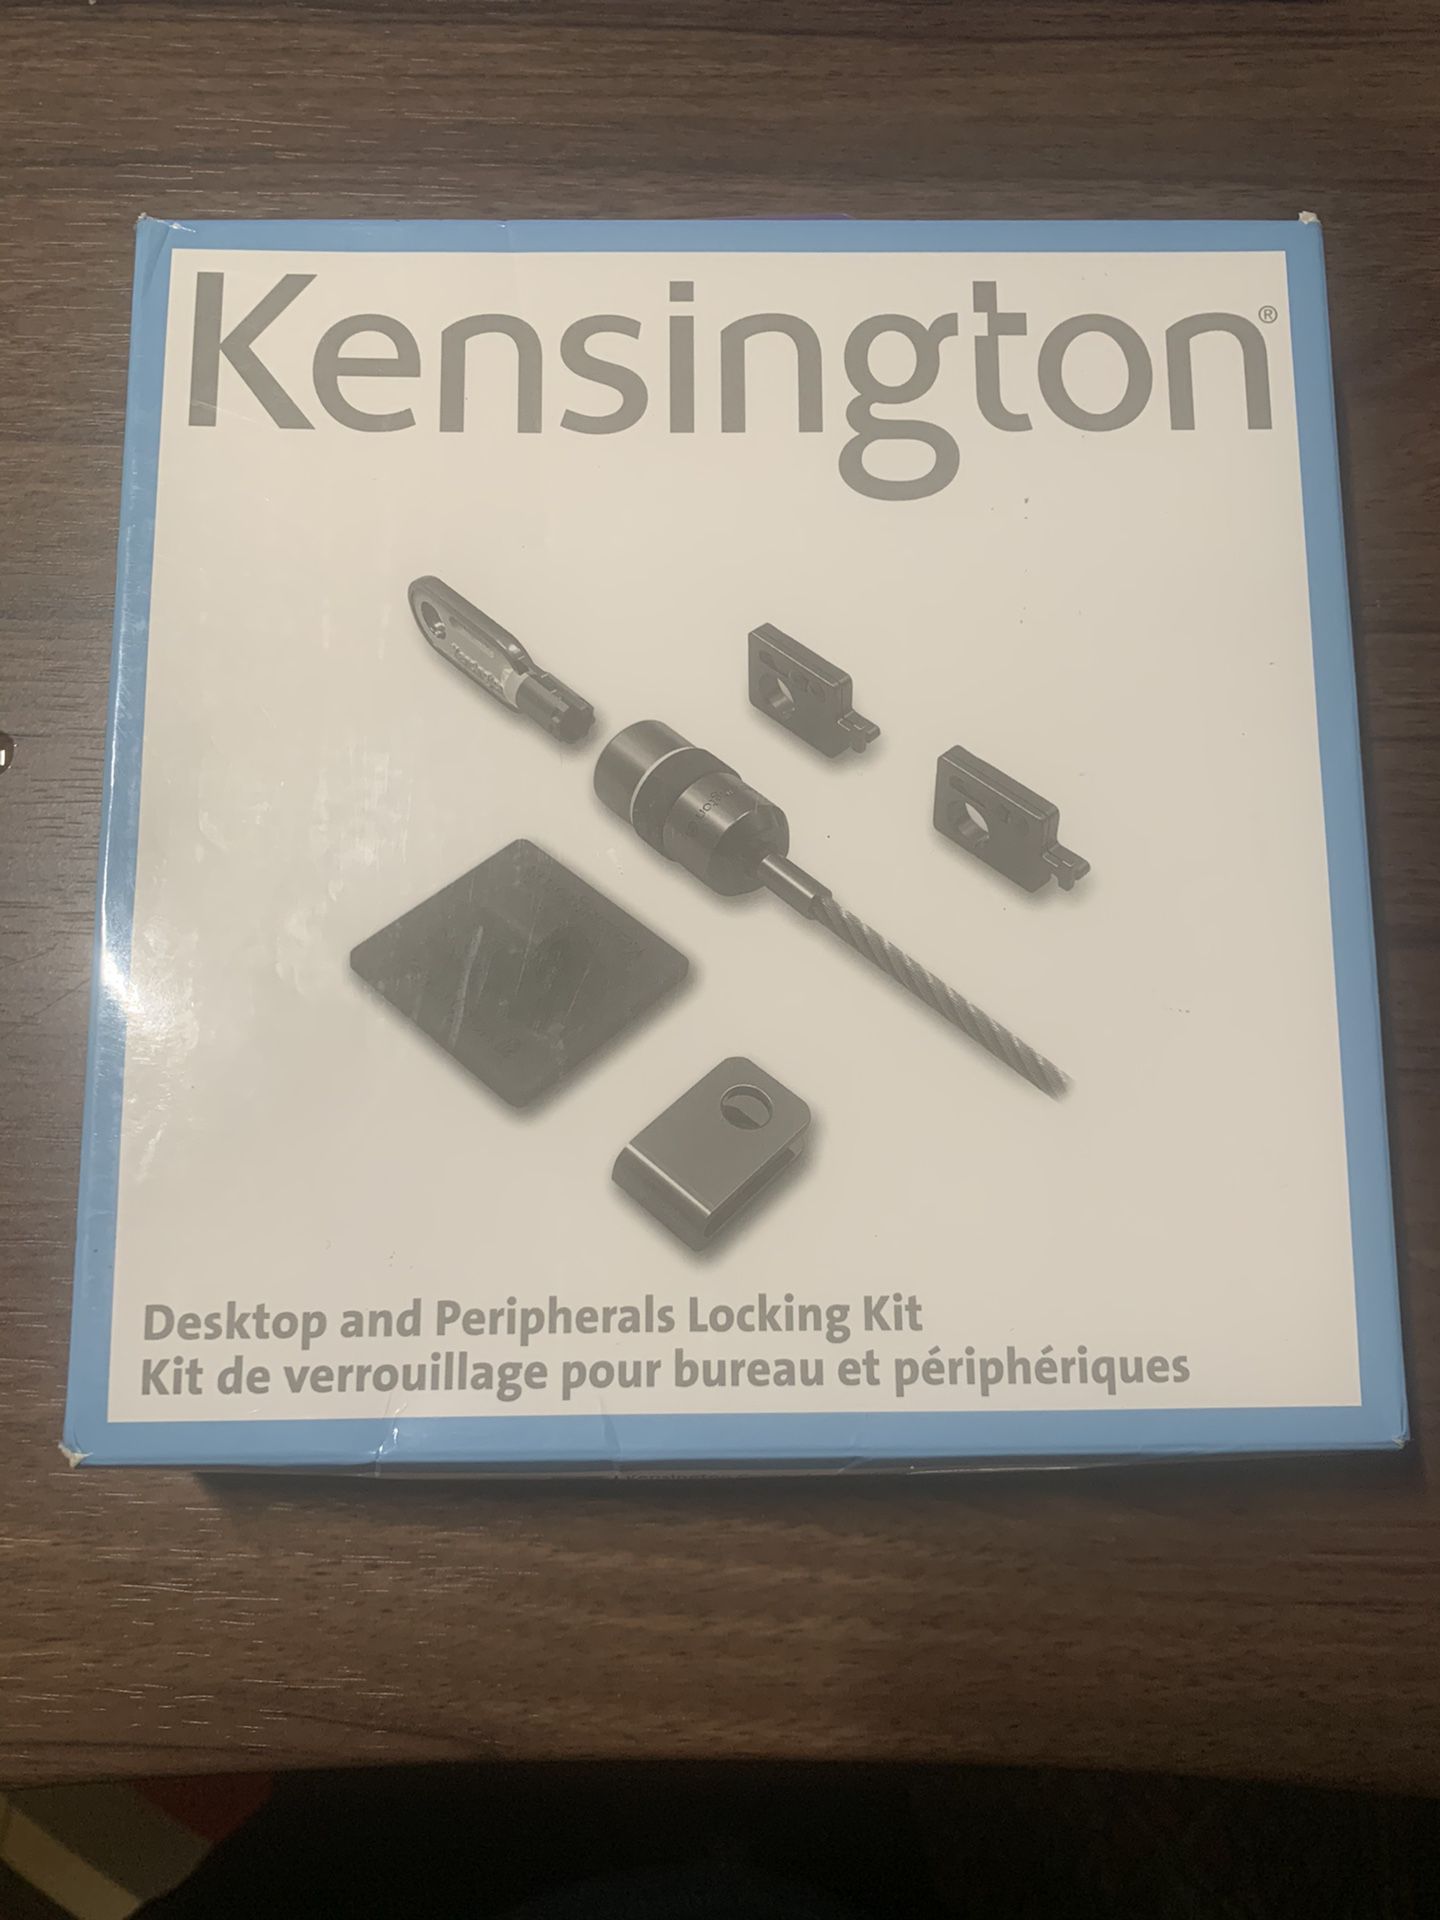 Kensington Desktop Computer and Peripherals Locking Kit (K64615US) New. Condition is New